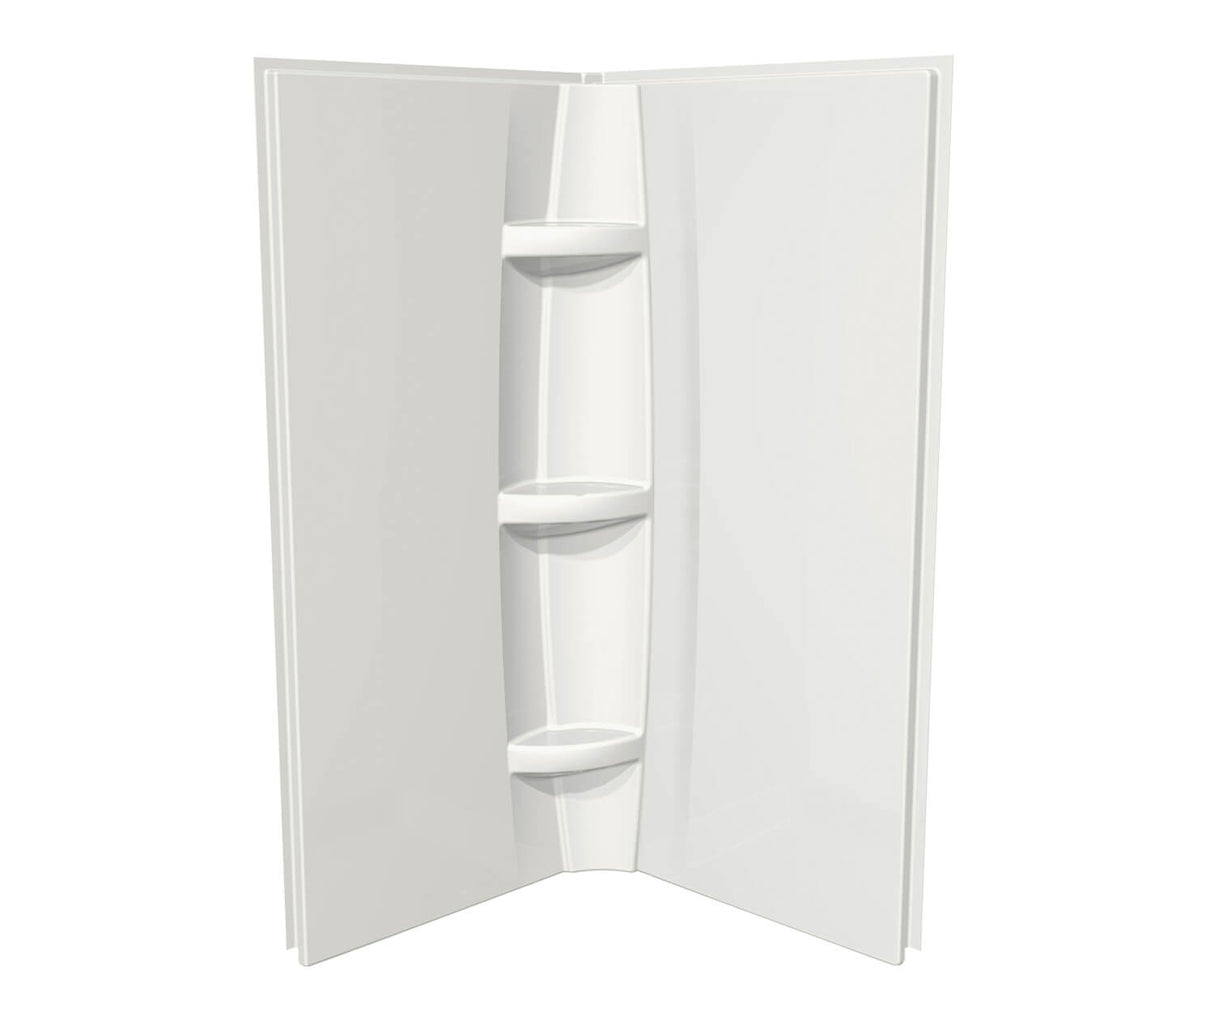 MAAX 105066-000-001-000 40 x 72 in. Acrylic Direct-to-Stud Two-Piece Shower Wall Kit in White